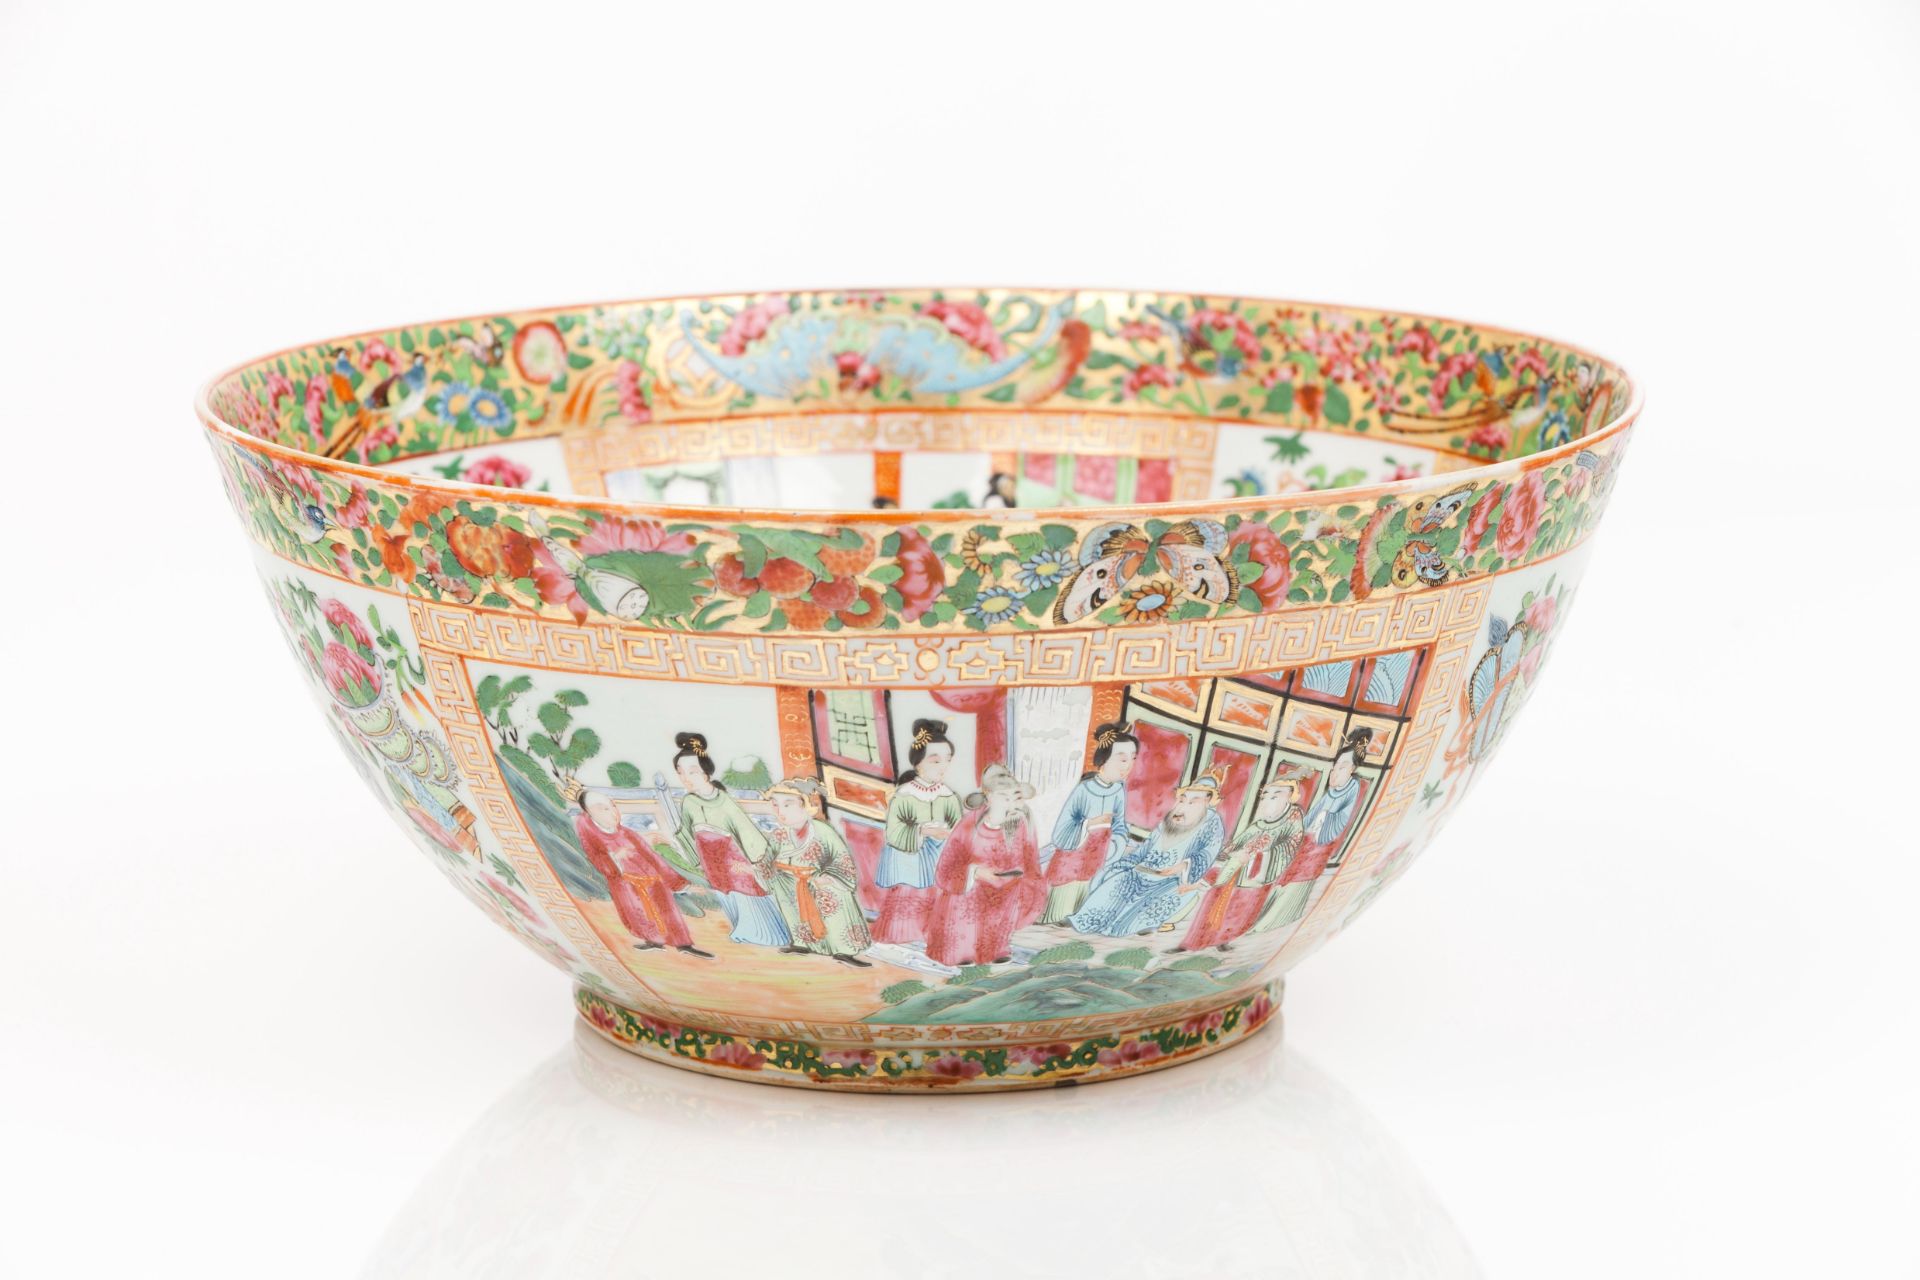 A punch bowl